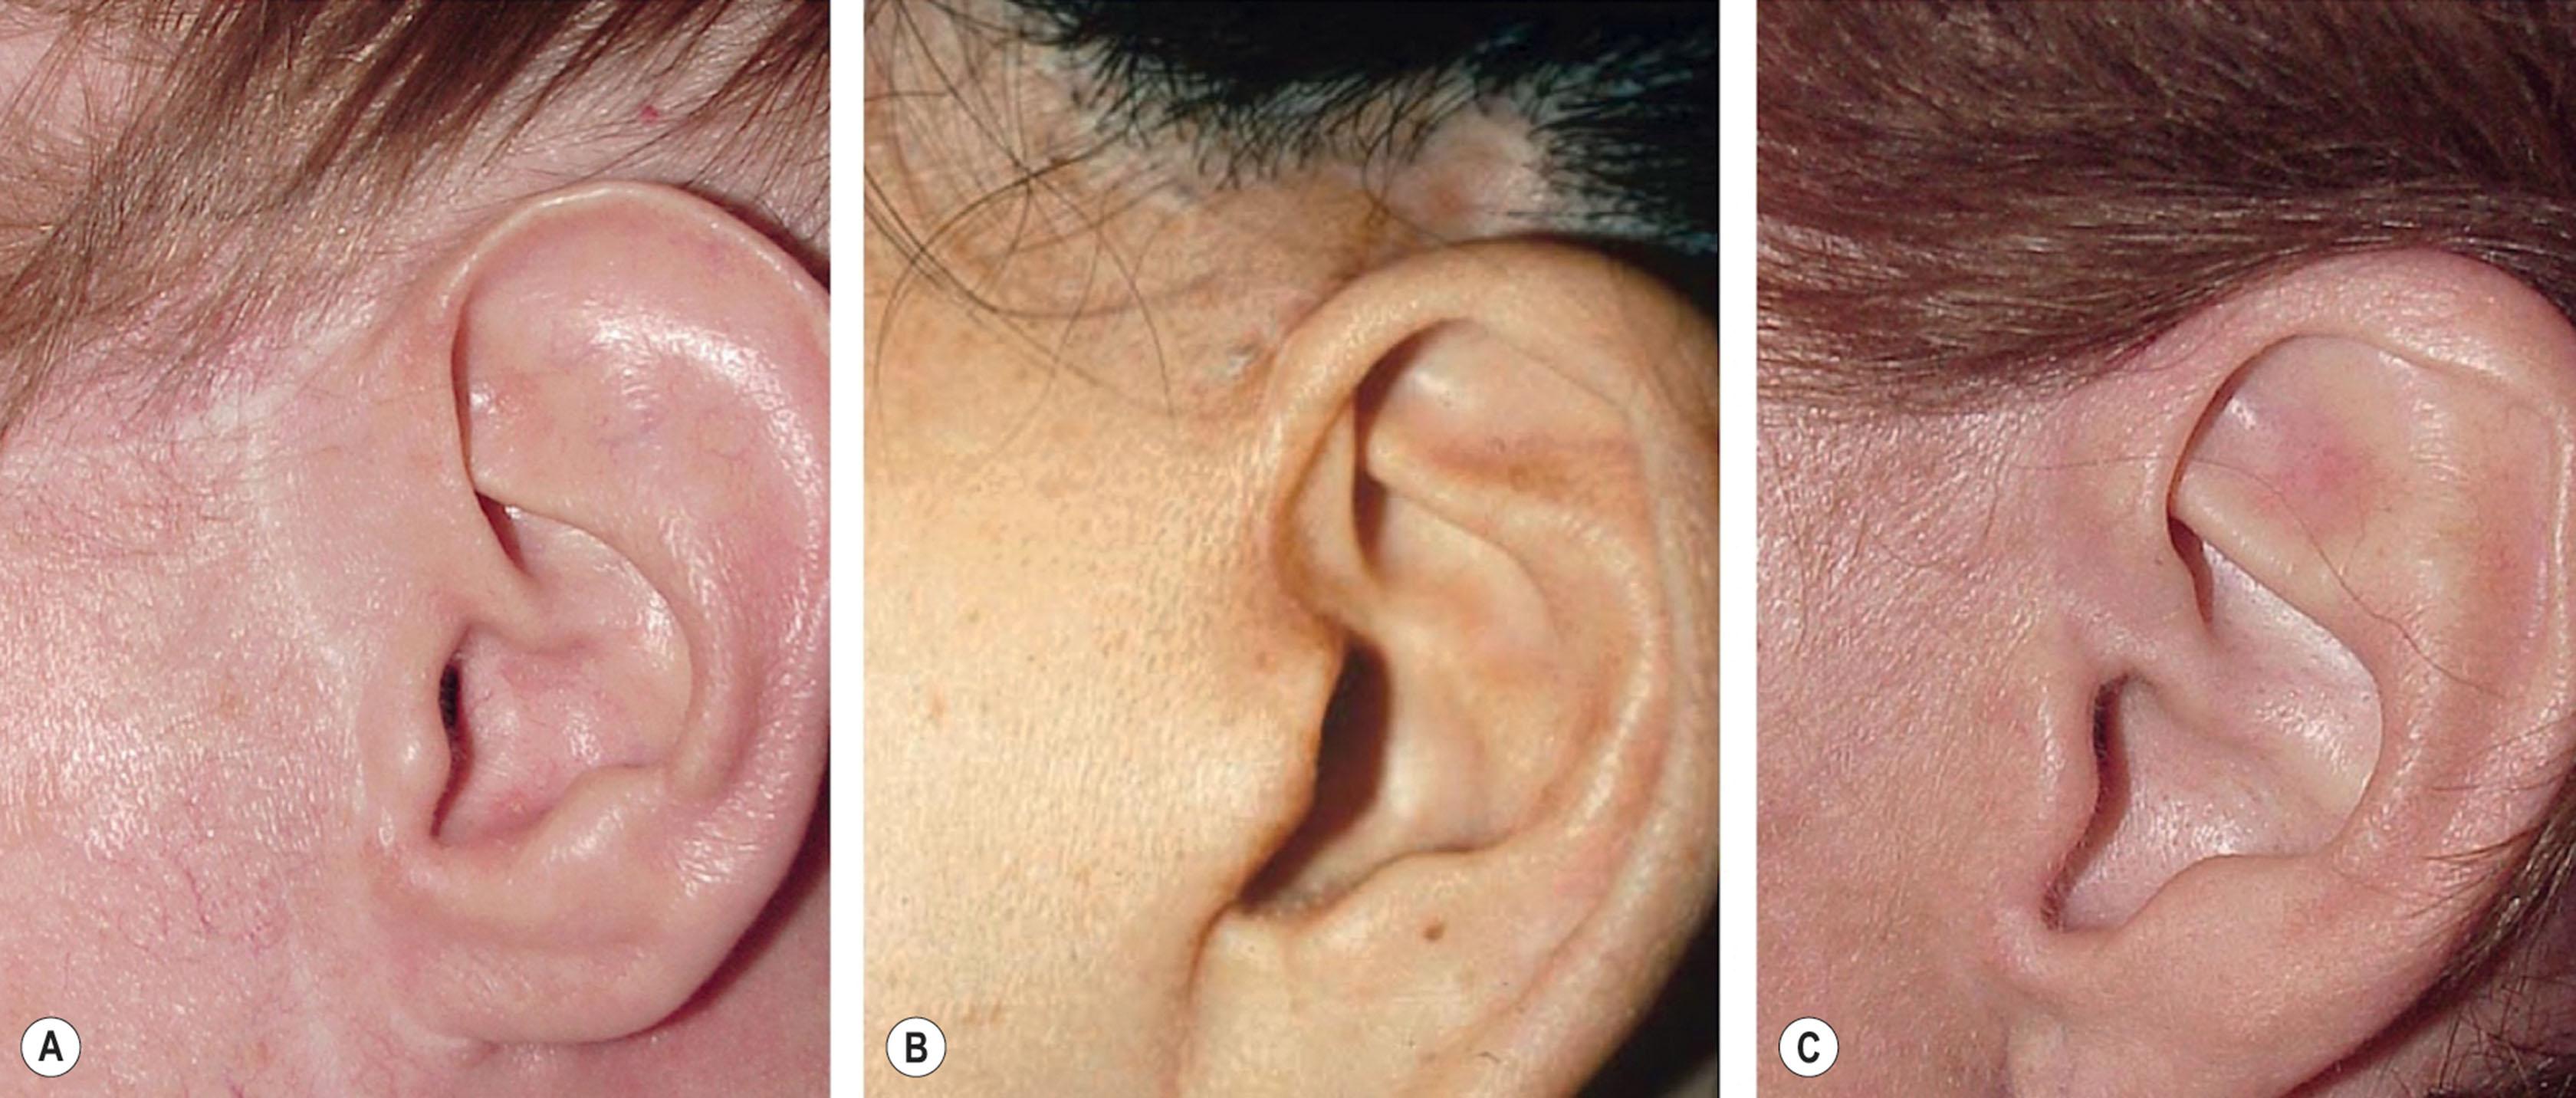 Figure 9.12.15, Improper and proper placement of pre-helical scar. The pre-helical portion of the preauricular scar is often poorly situated (A,B) in patients presenting for secondary facelifts and the illusion of it as an anatomical feature is lost. (A) The pre-helical incision has been made too far anteriorly and the illusion of the scar as an anatomical feature is lost. Procedure performed by an unknown surgeon. (B) The pre-helical incision has been made too far posteriorly and the facelift skin flap advanced onto the helix, and has resulted in obliteration of the helical facial sulcus and part of the helix itself. The illusion of the scar as an anatomical feature is lost. Procedure performed by an unknown surgeon. (C) A patient with a properly placed pre-helical incision. The scar has been placed directly in the helical facial sulcus. In this location a transition of color and texture is expected and the scar appears to be a natural anatomical feature. Procedure performed by Timothy J. Marten, MD, FACS.